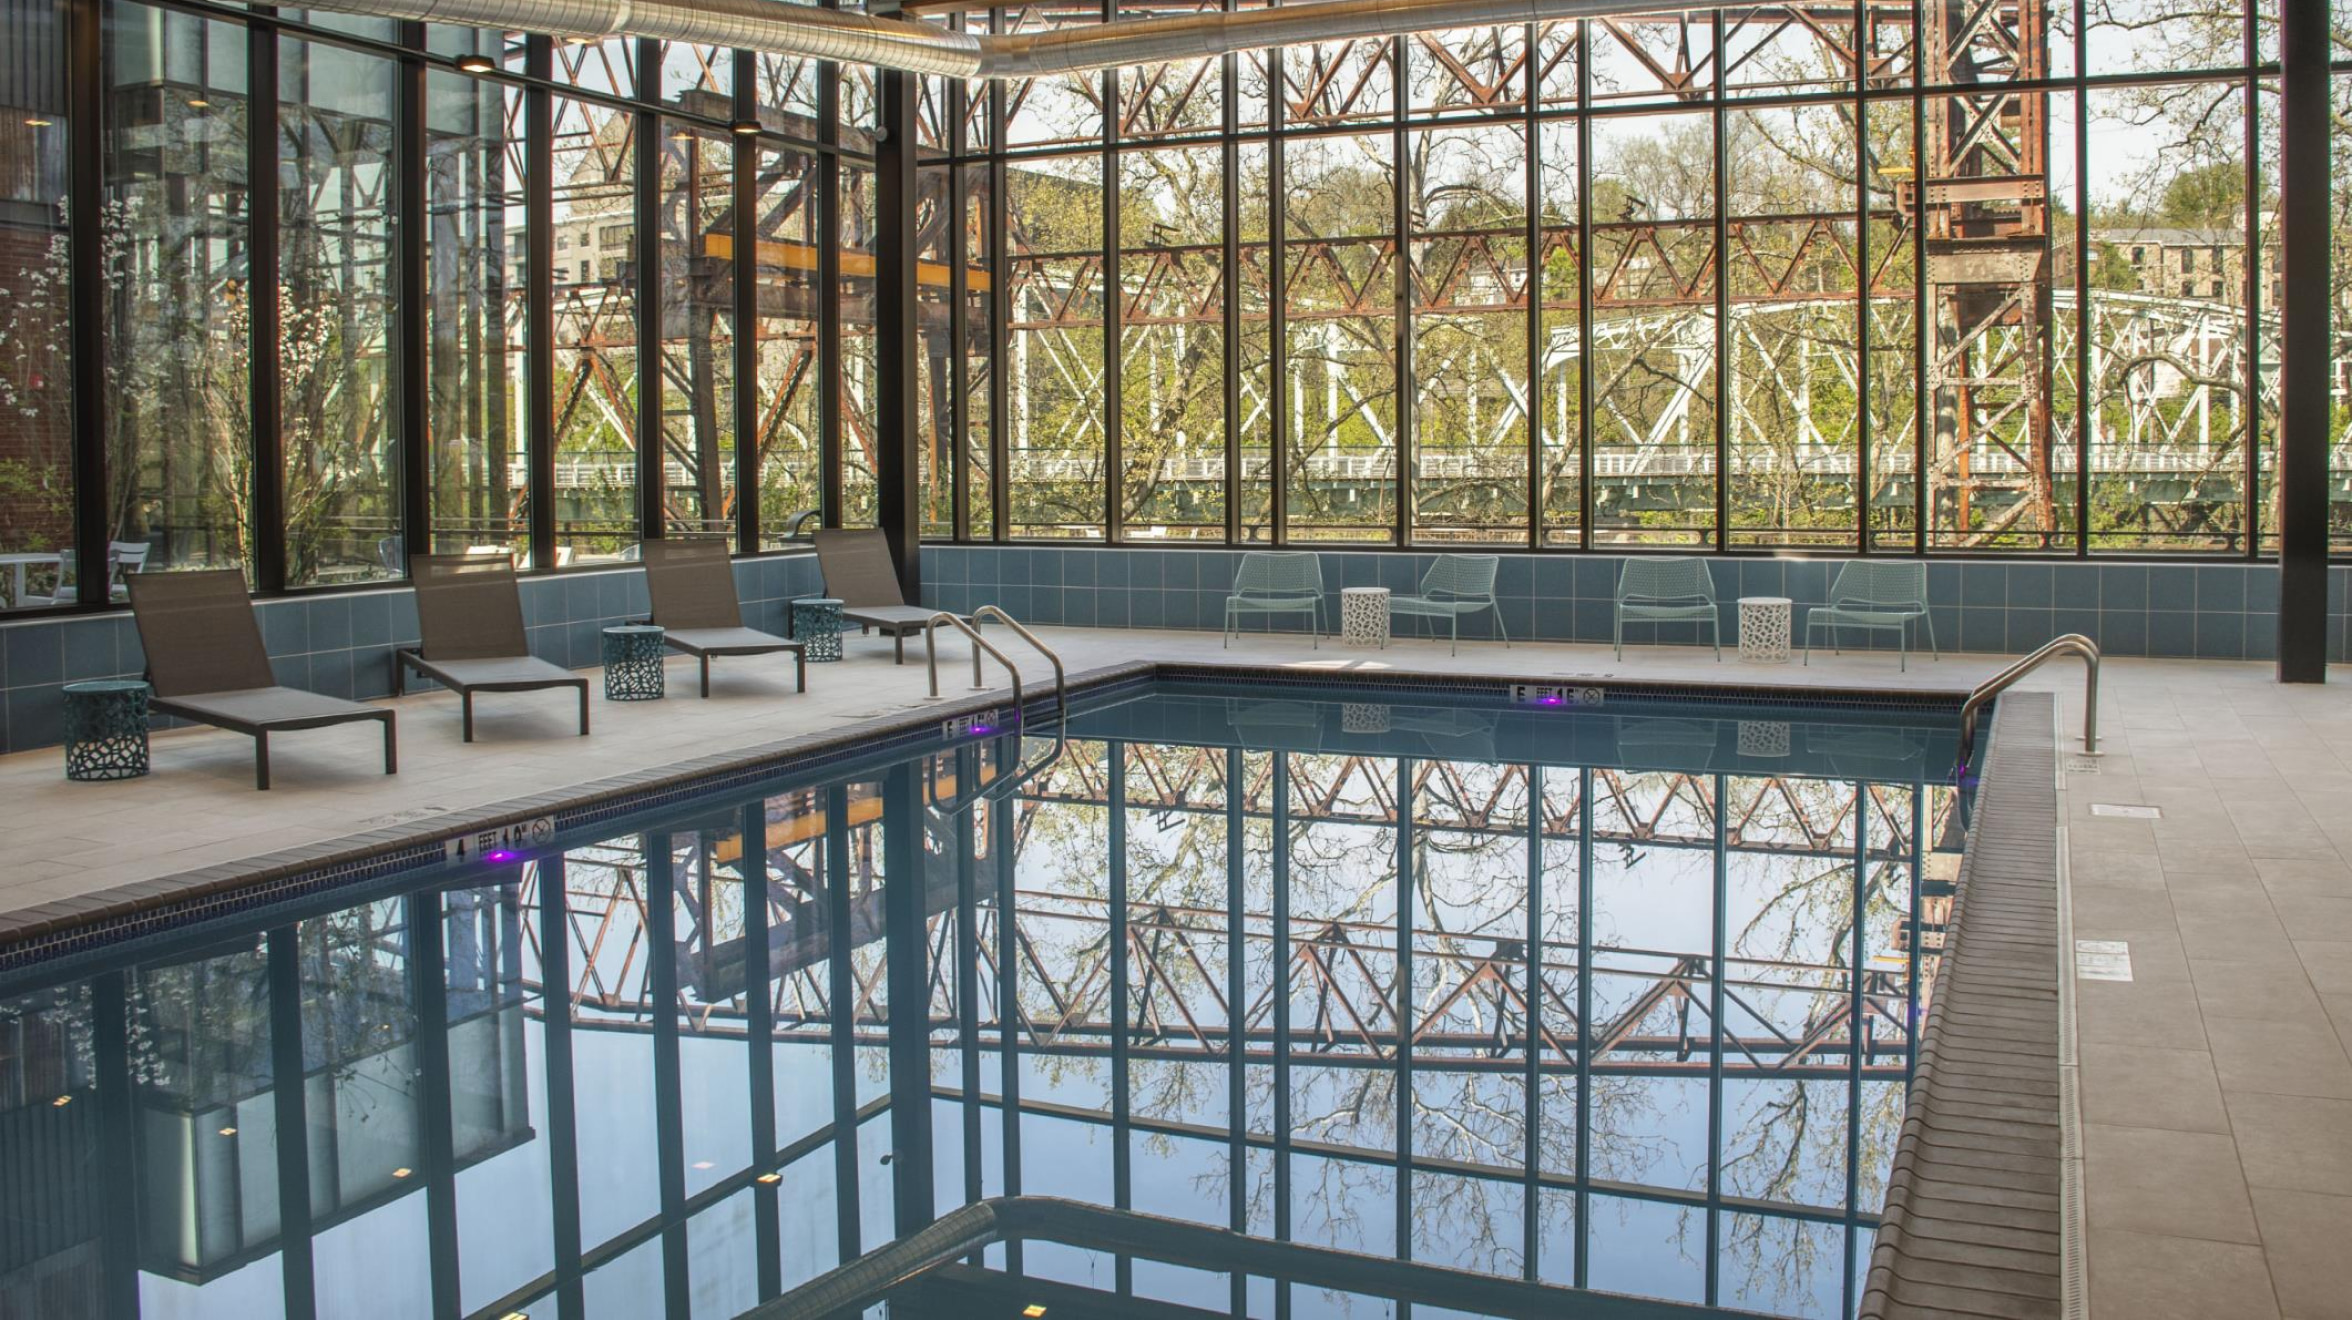 Pencoyd indoor swimming pool with chairs